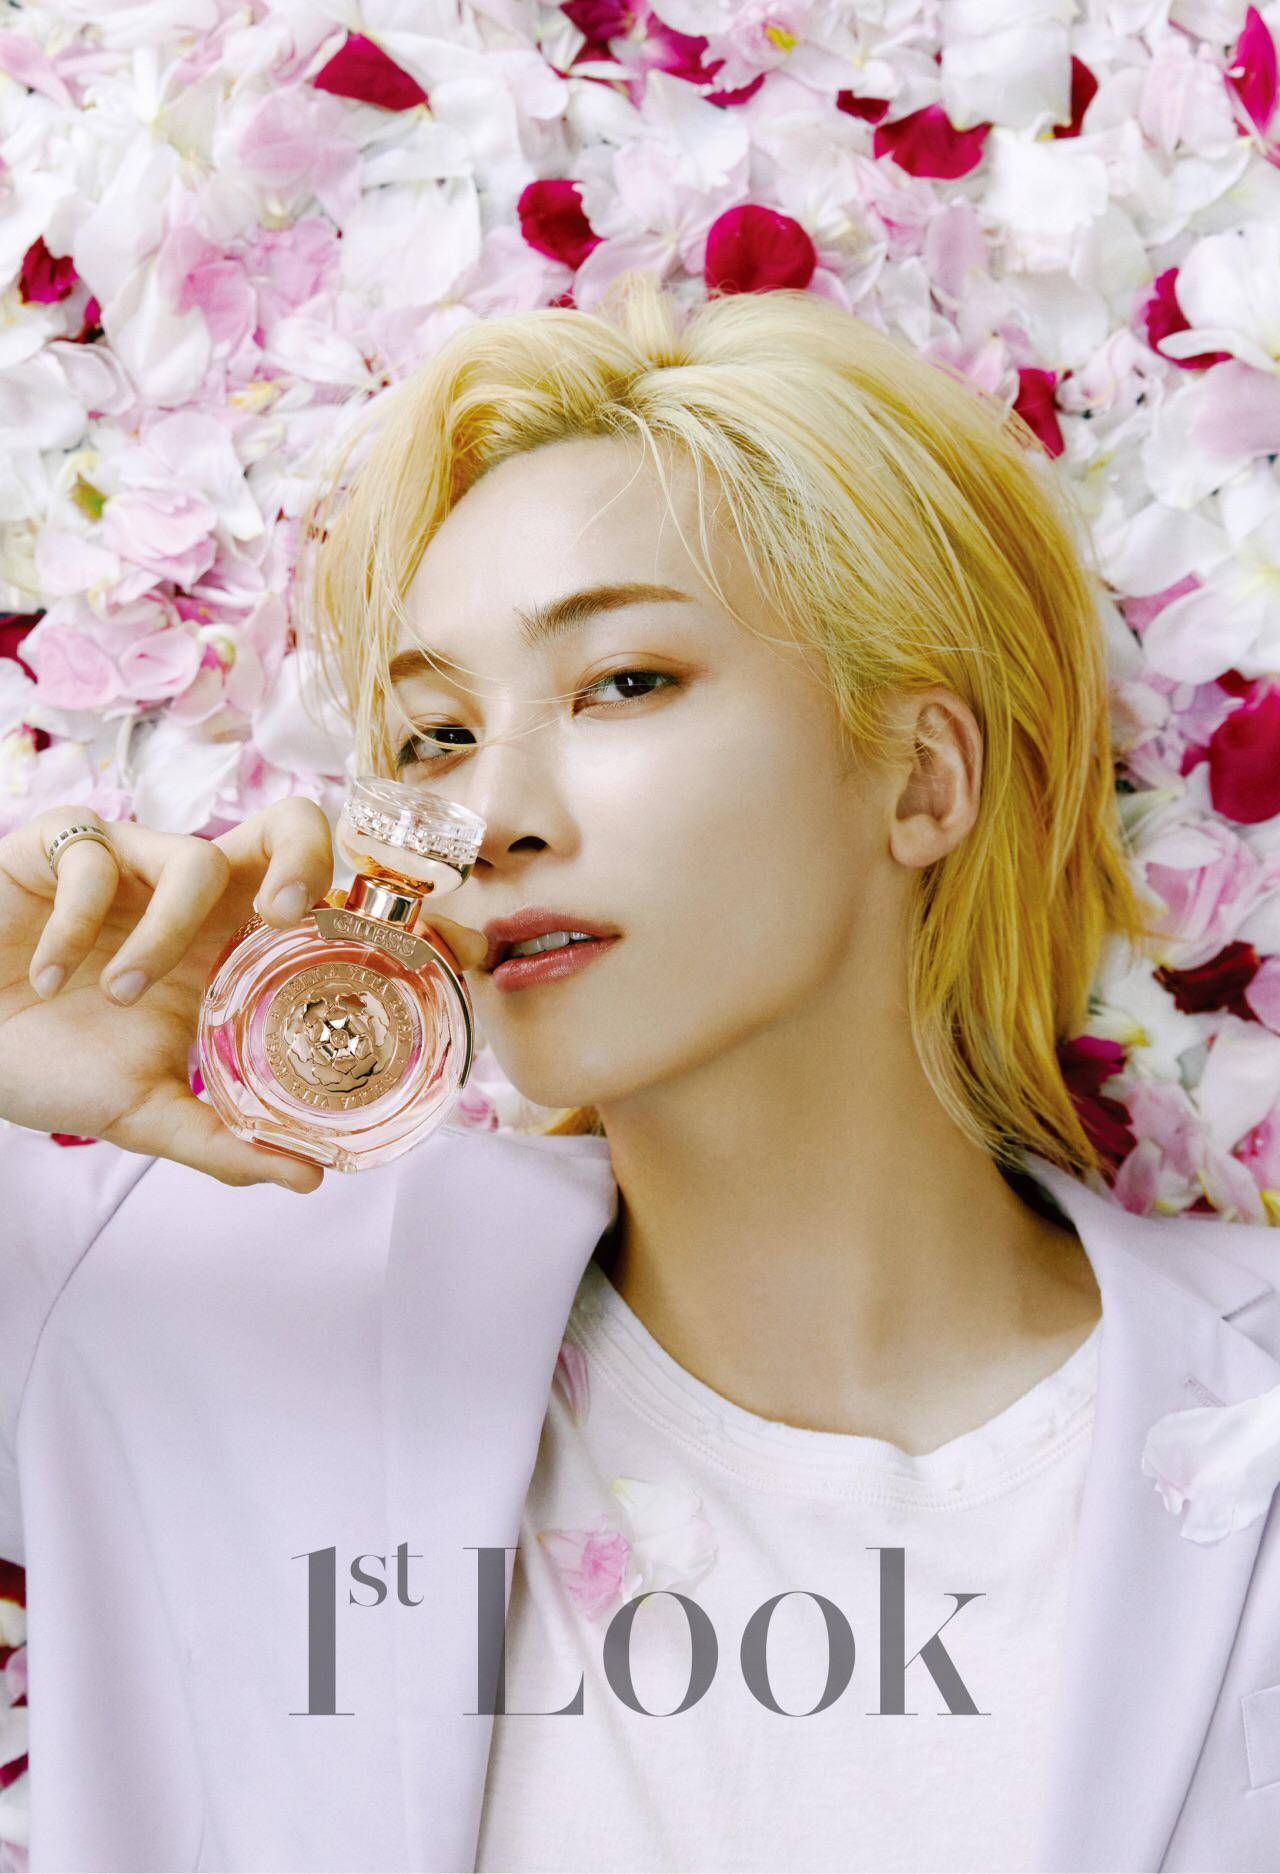 Yoon Jeonghan For 1st Look